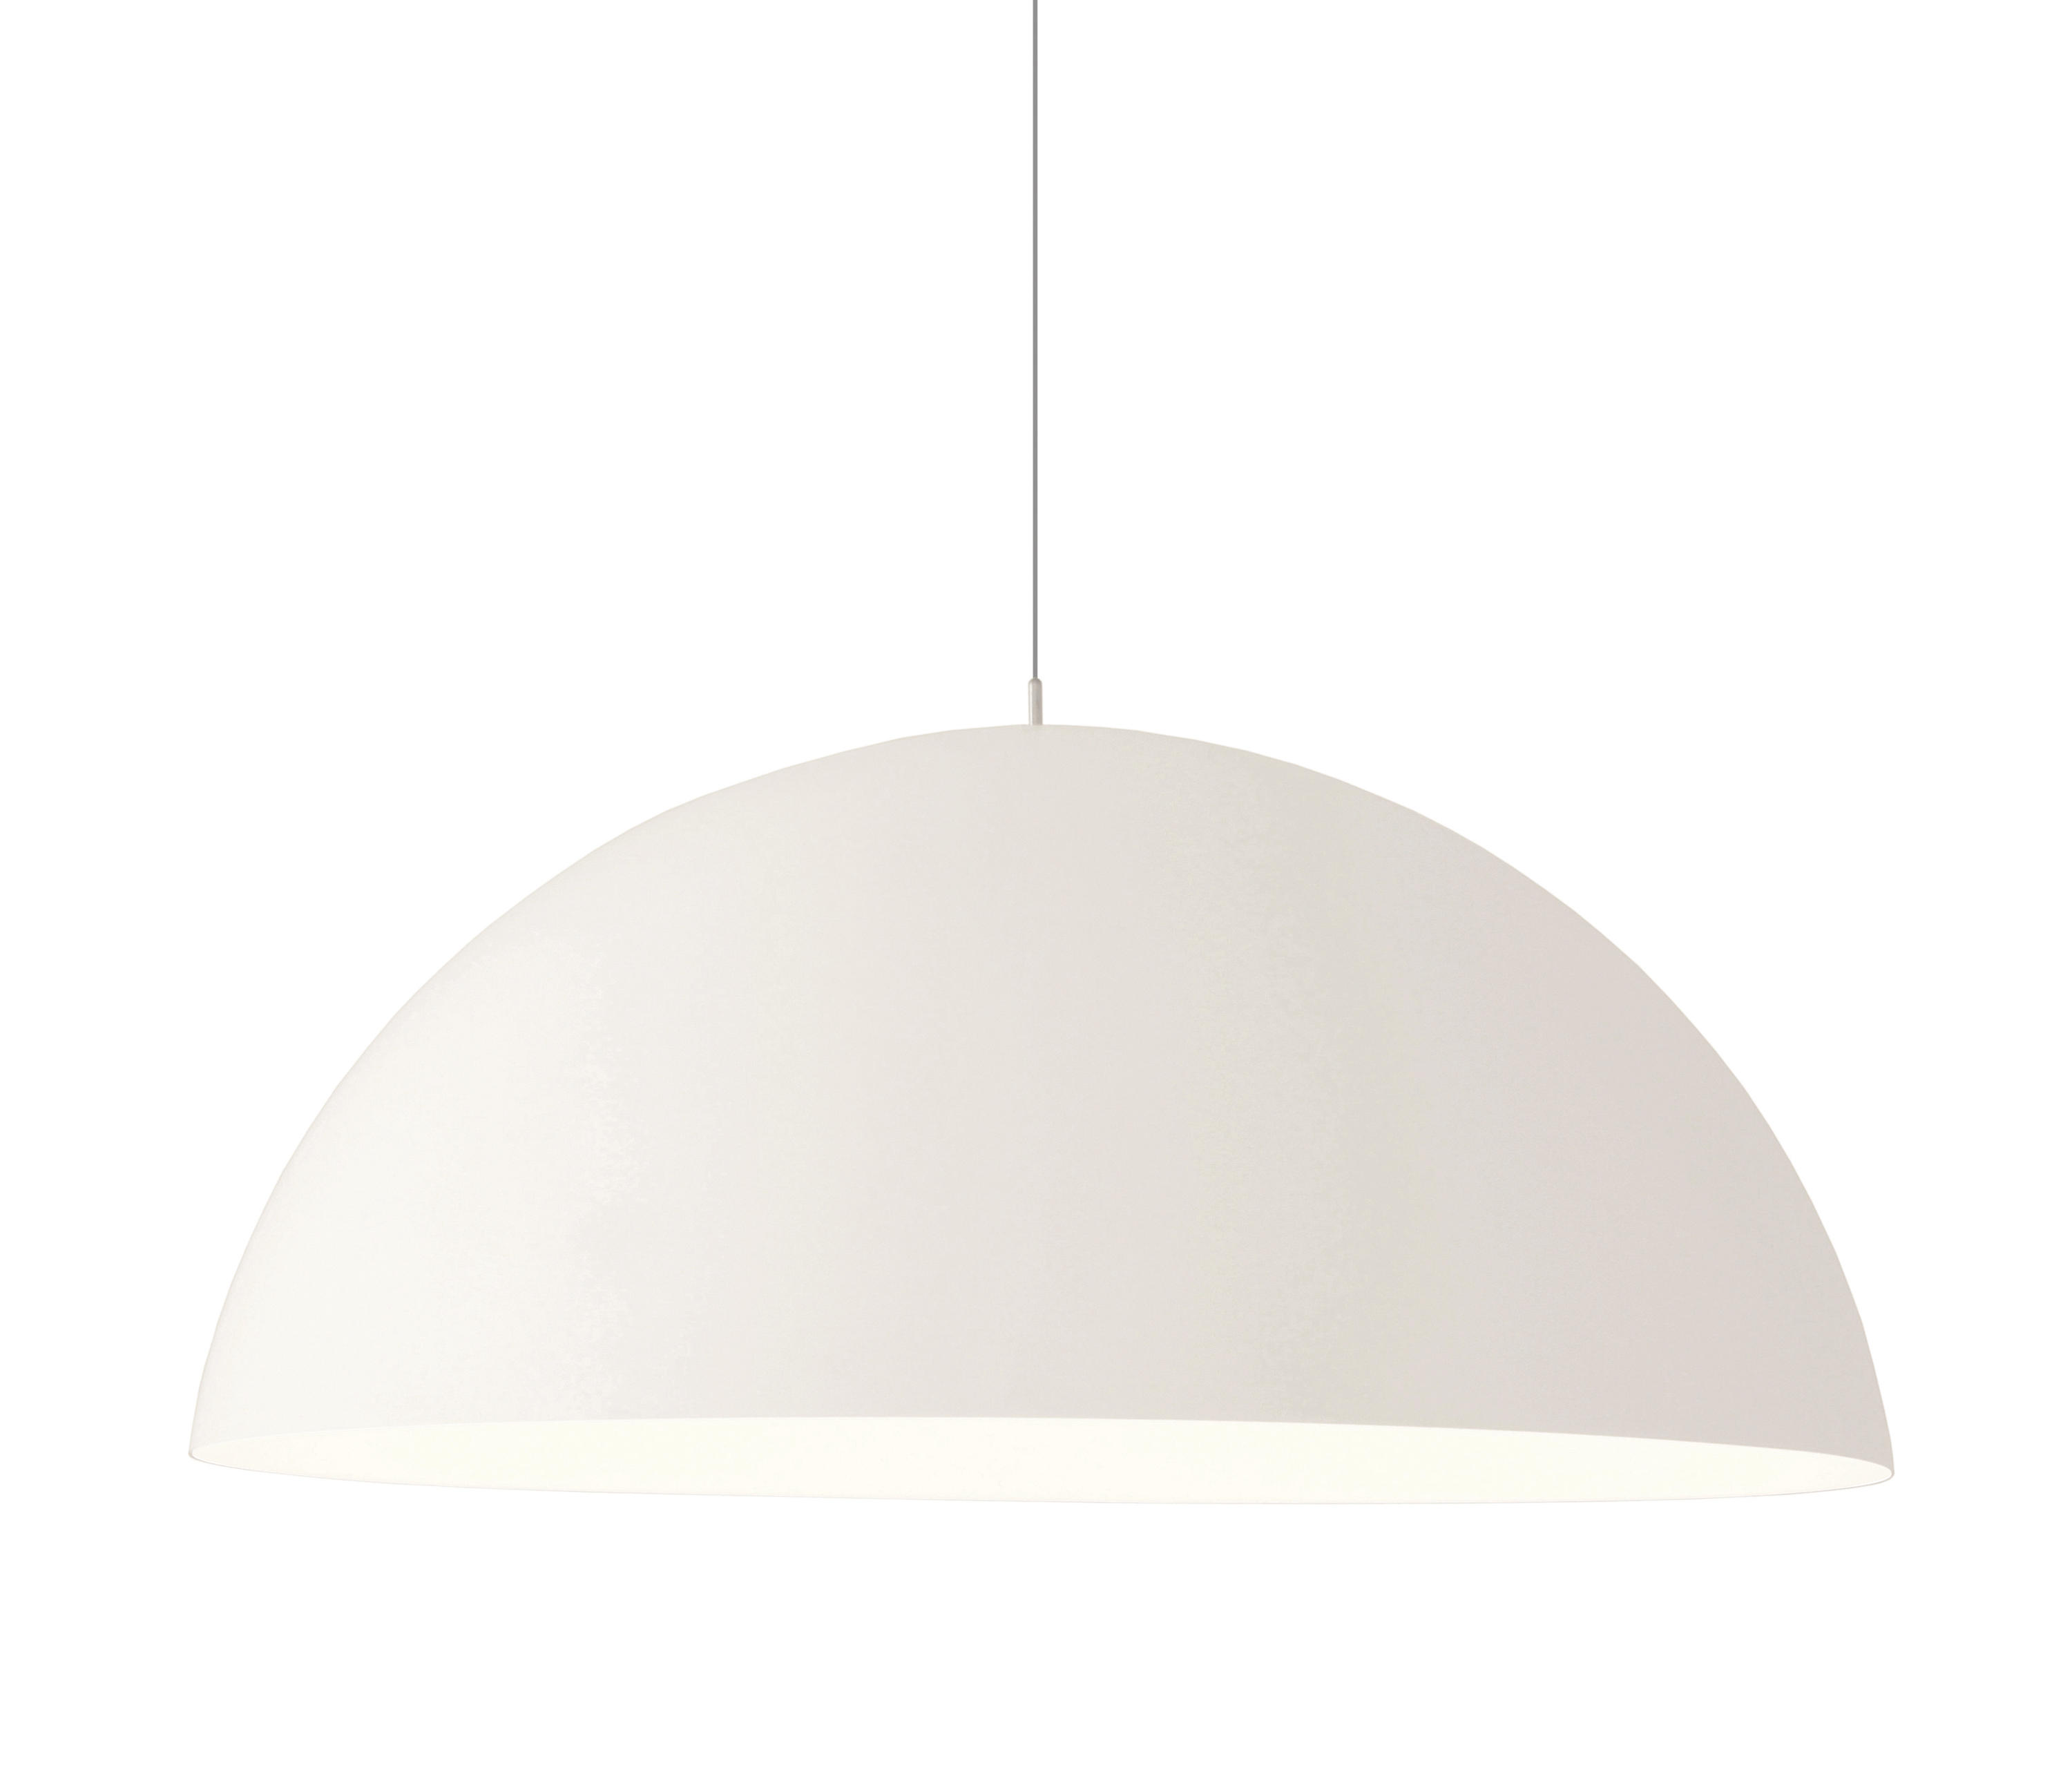 LARGE - Suspended lights from Eden Design | Architonic